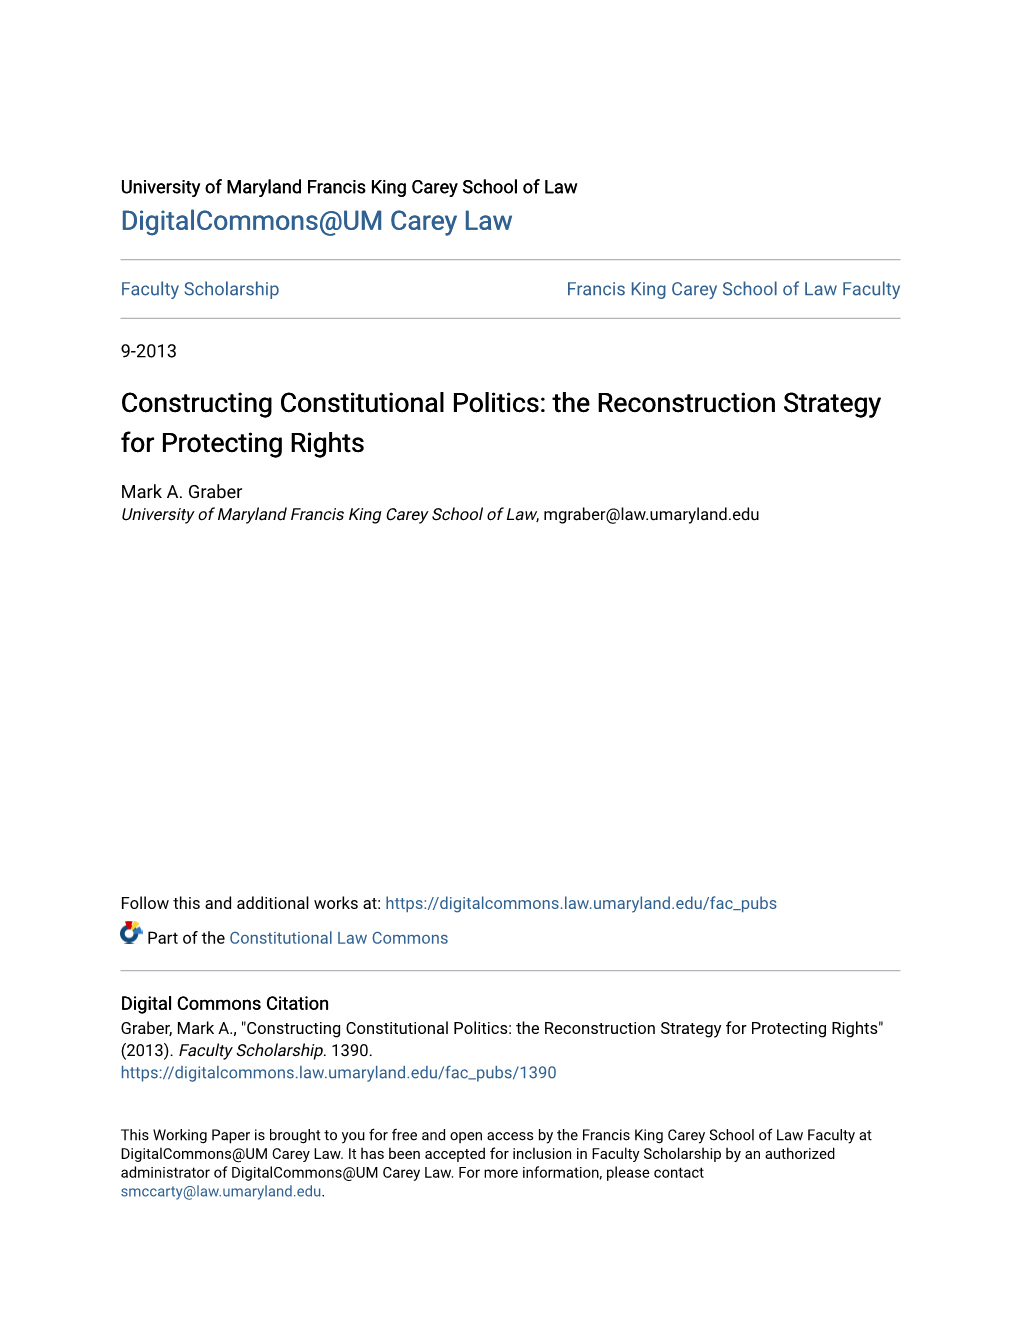 Constructing Constitutional Politics: the Reconstruction Strategy for Protecting Rights